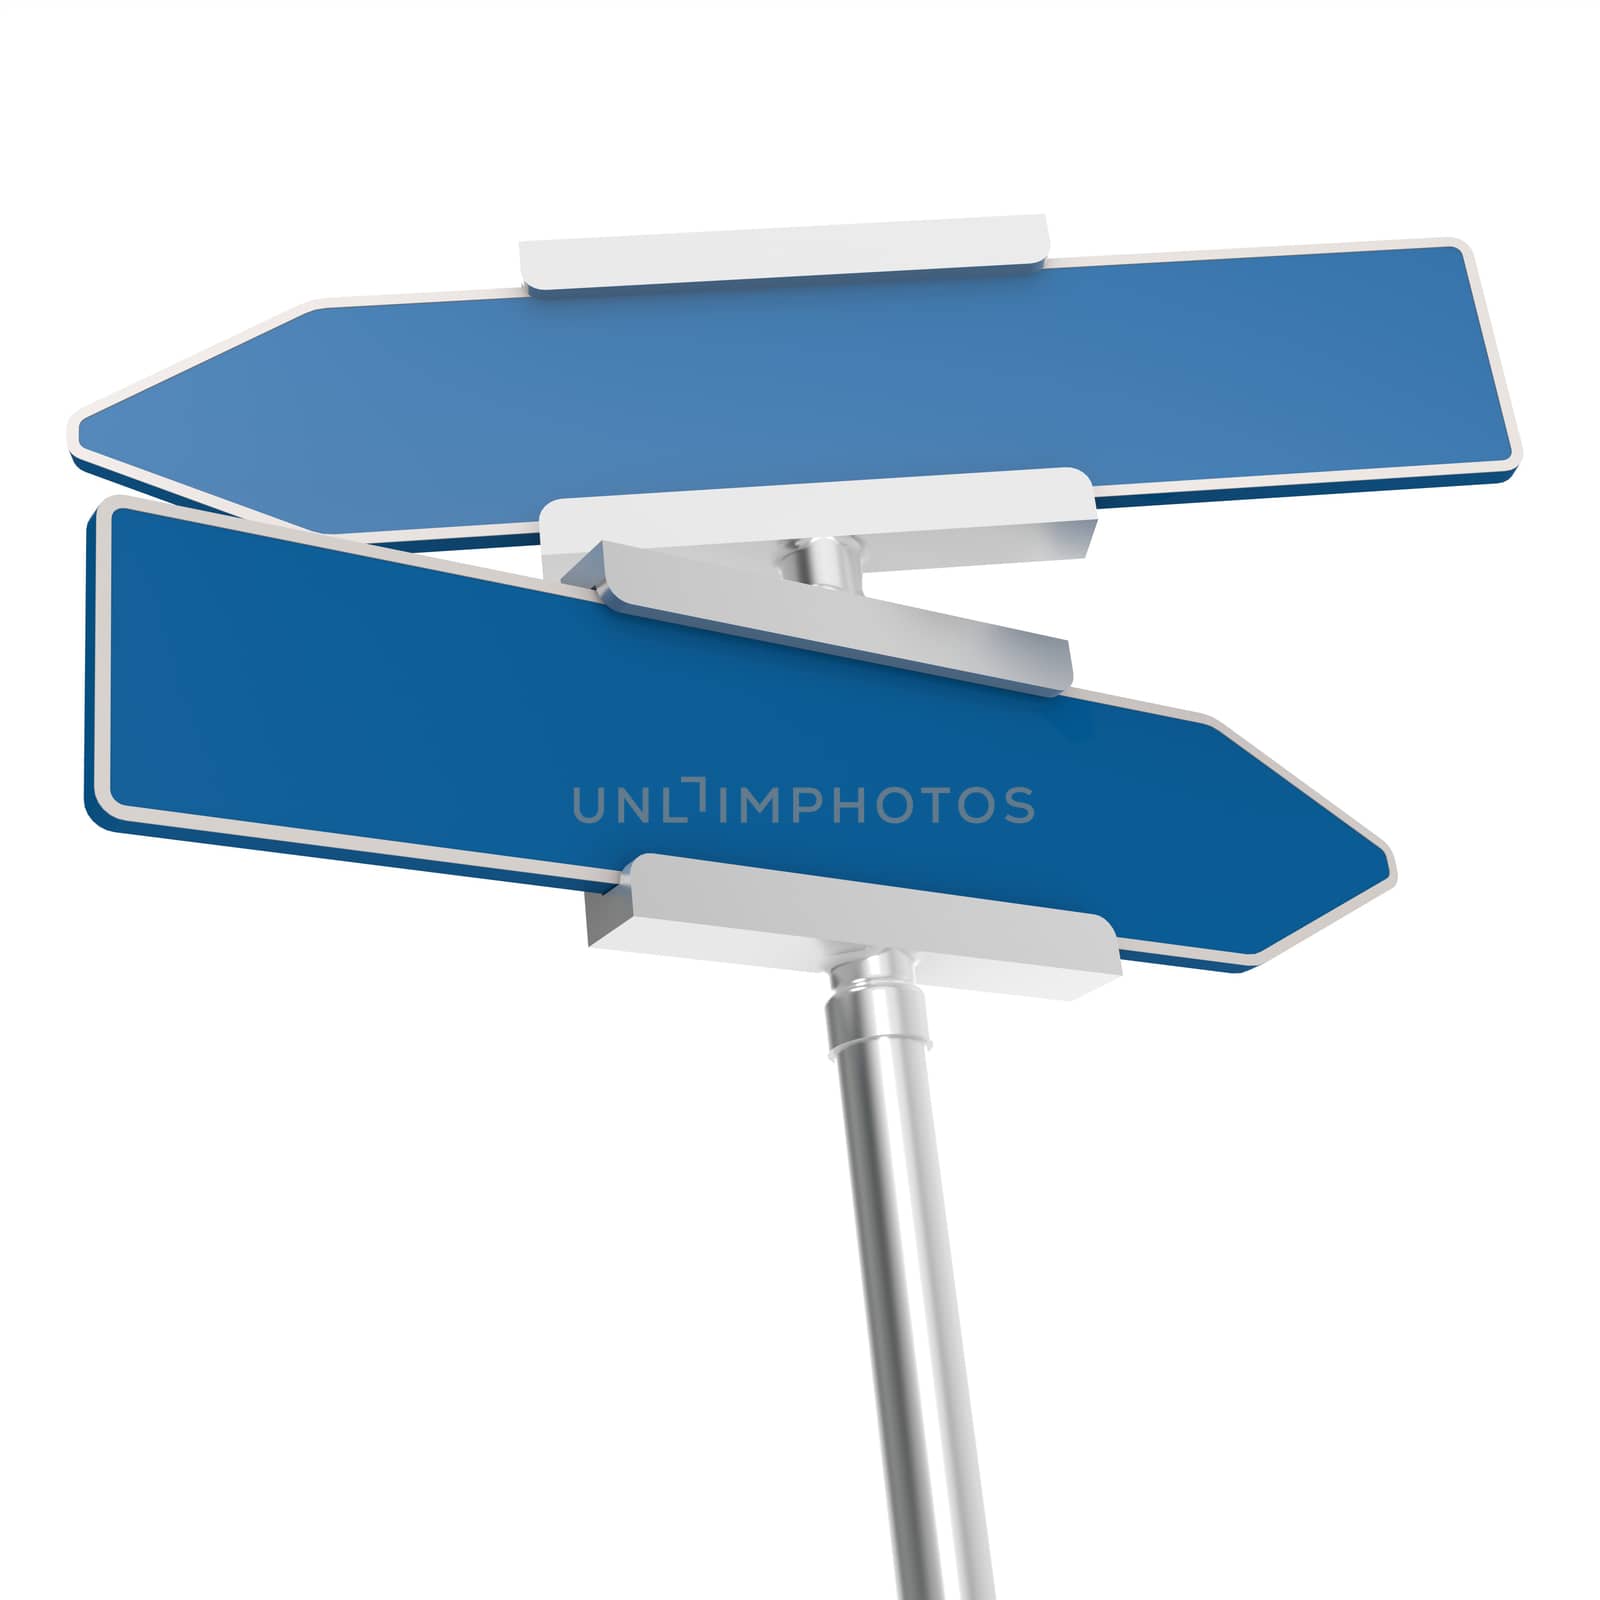 Blue signboard with metal pole by tang90246